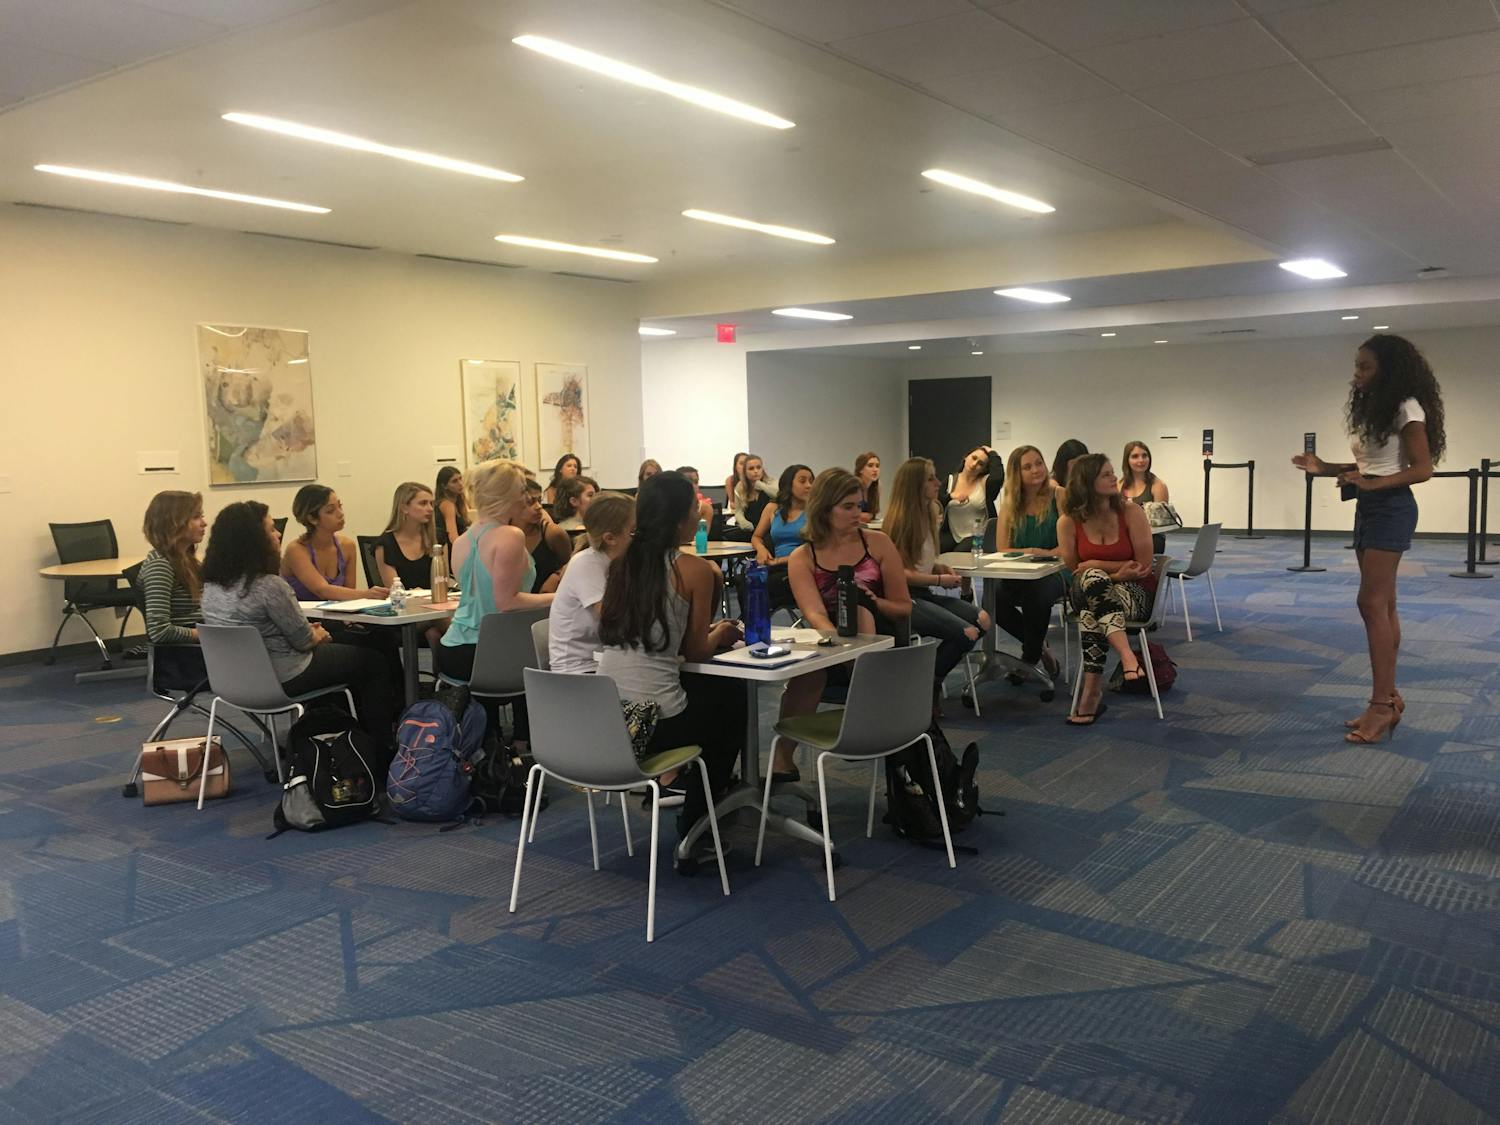 About 30 women in full makeup showed up at the Reitz Union on Sunday to audition for a princess role. Judges looked for attitude, stage presence and confidence.